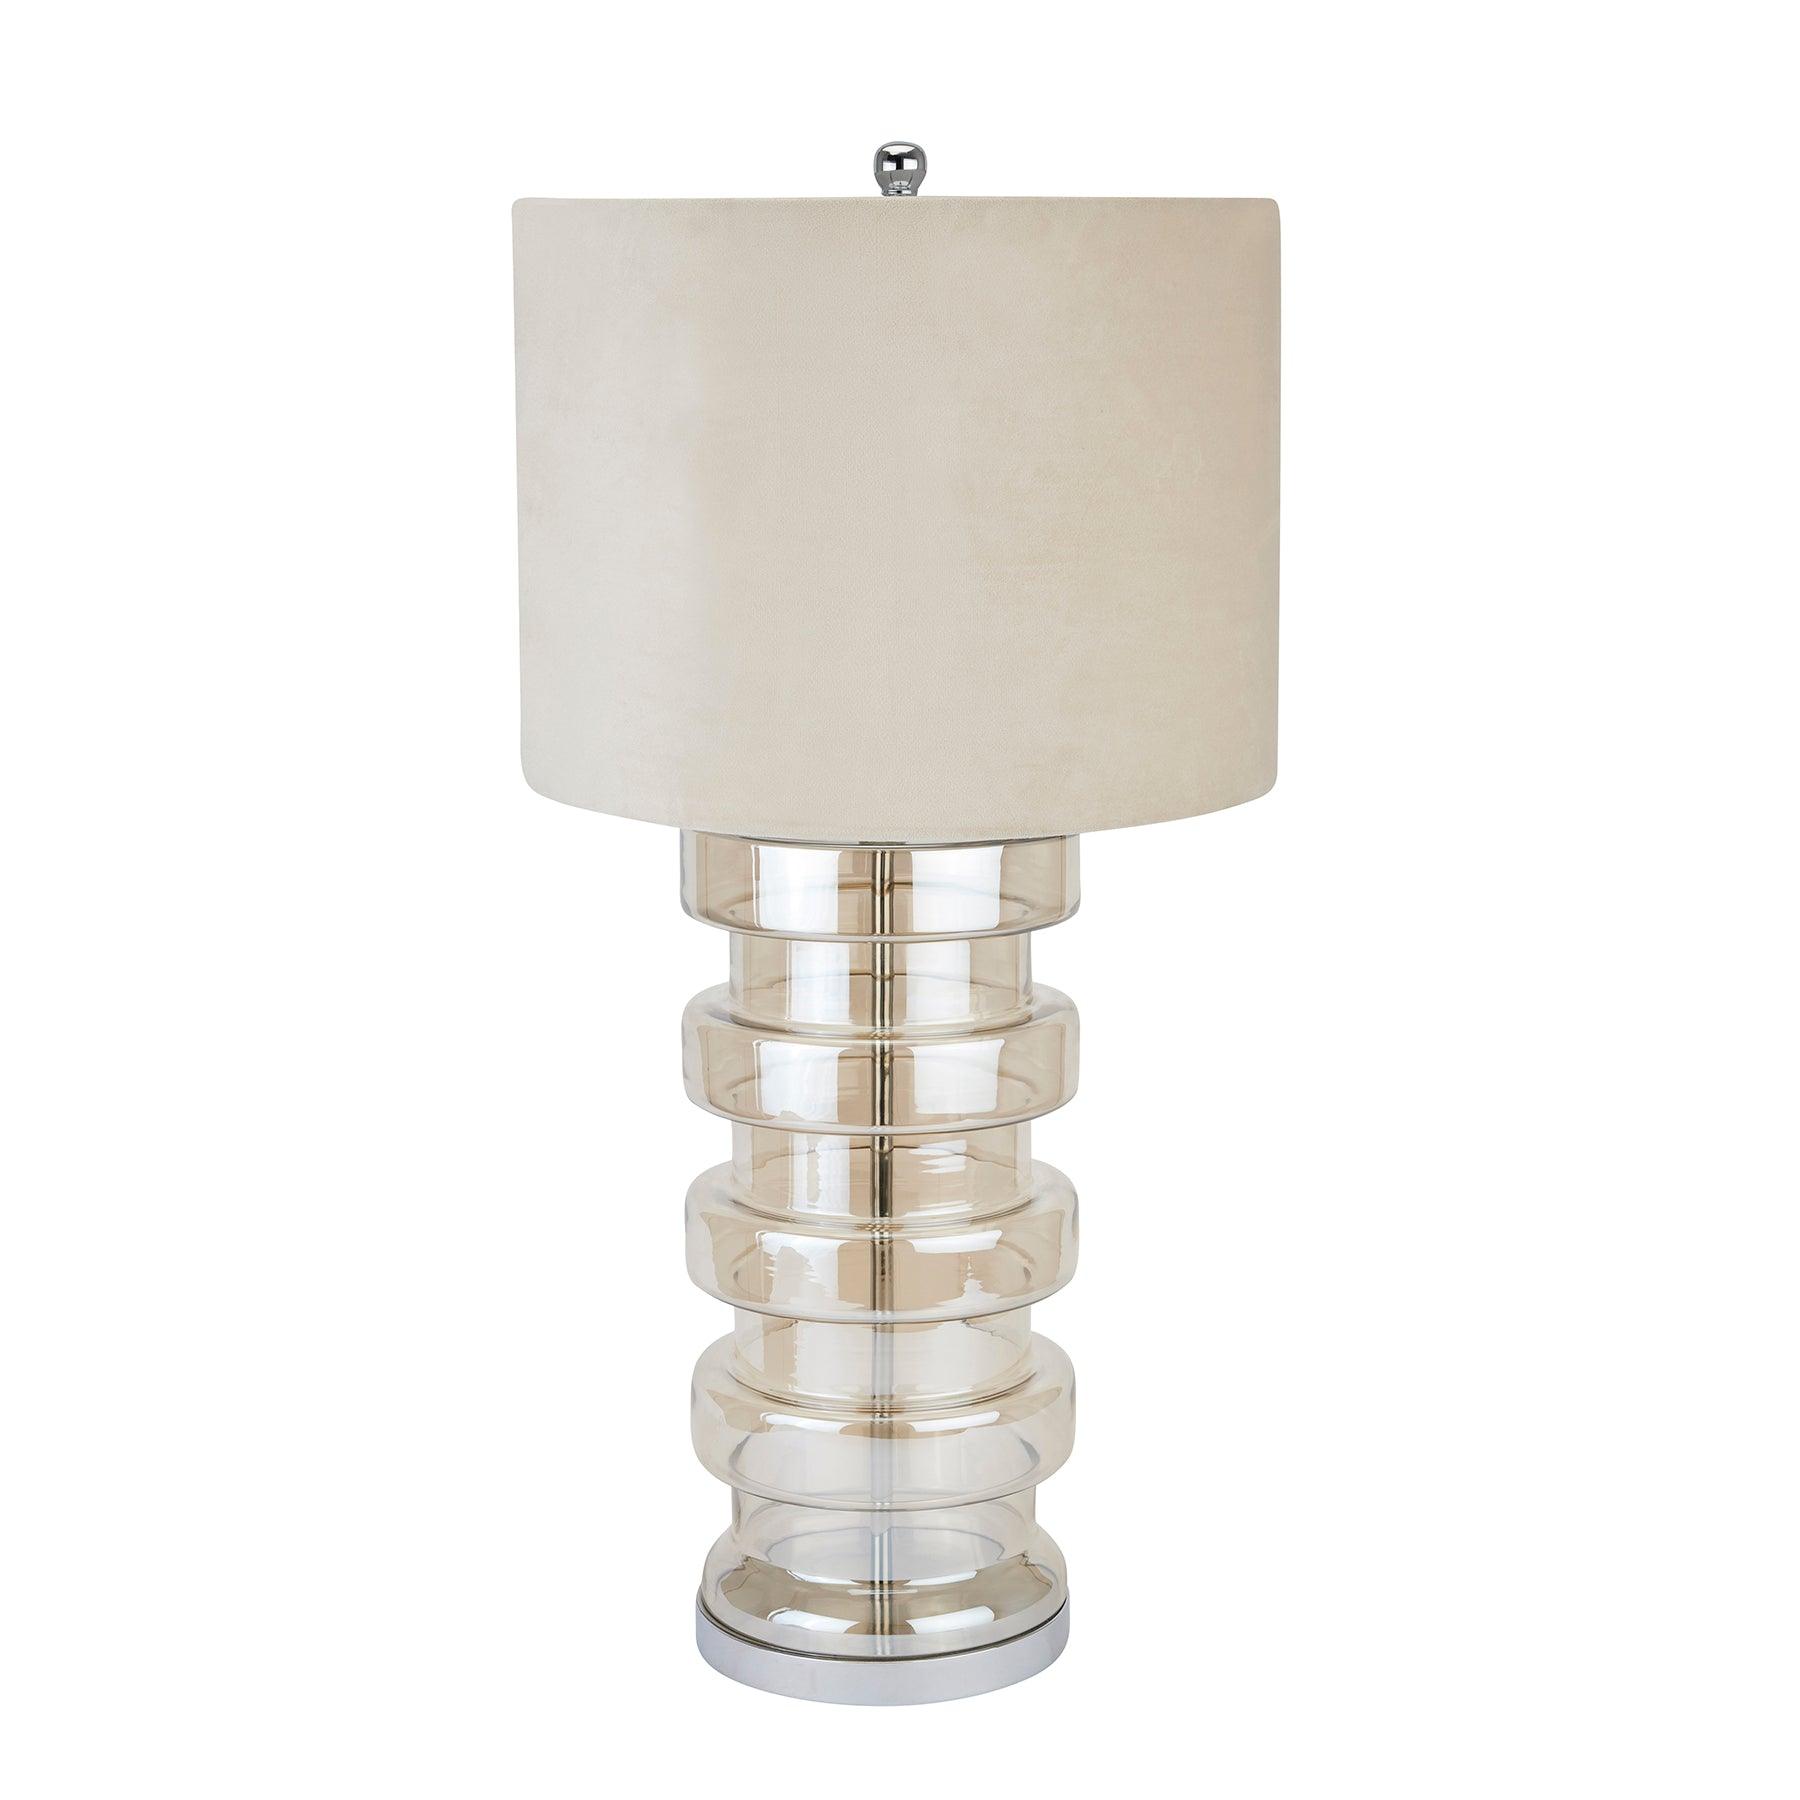 View Adonis Metallic Glass Lamp With Velvet Shade information